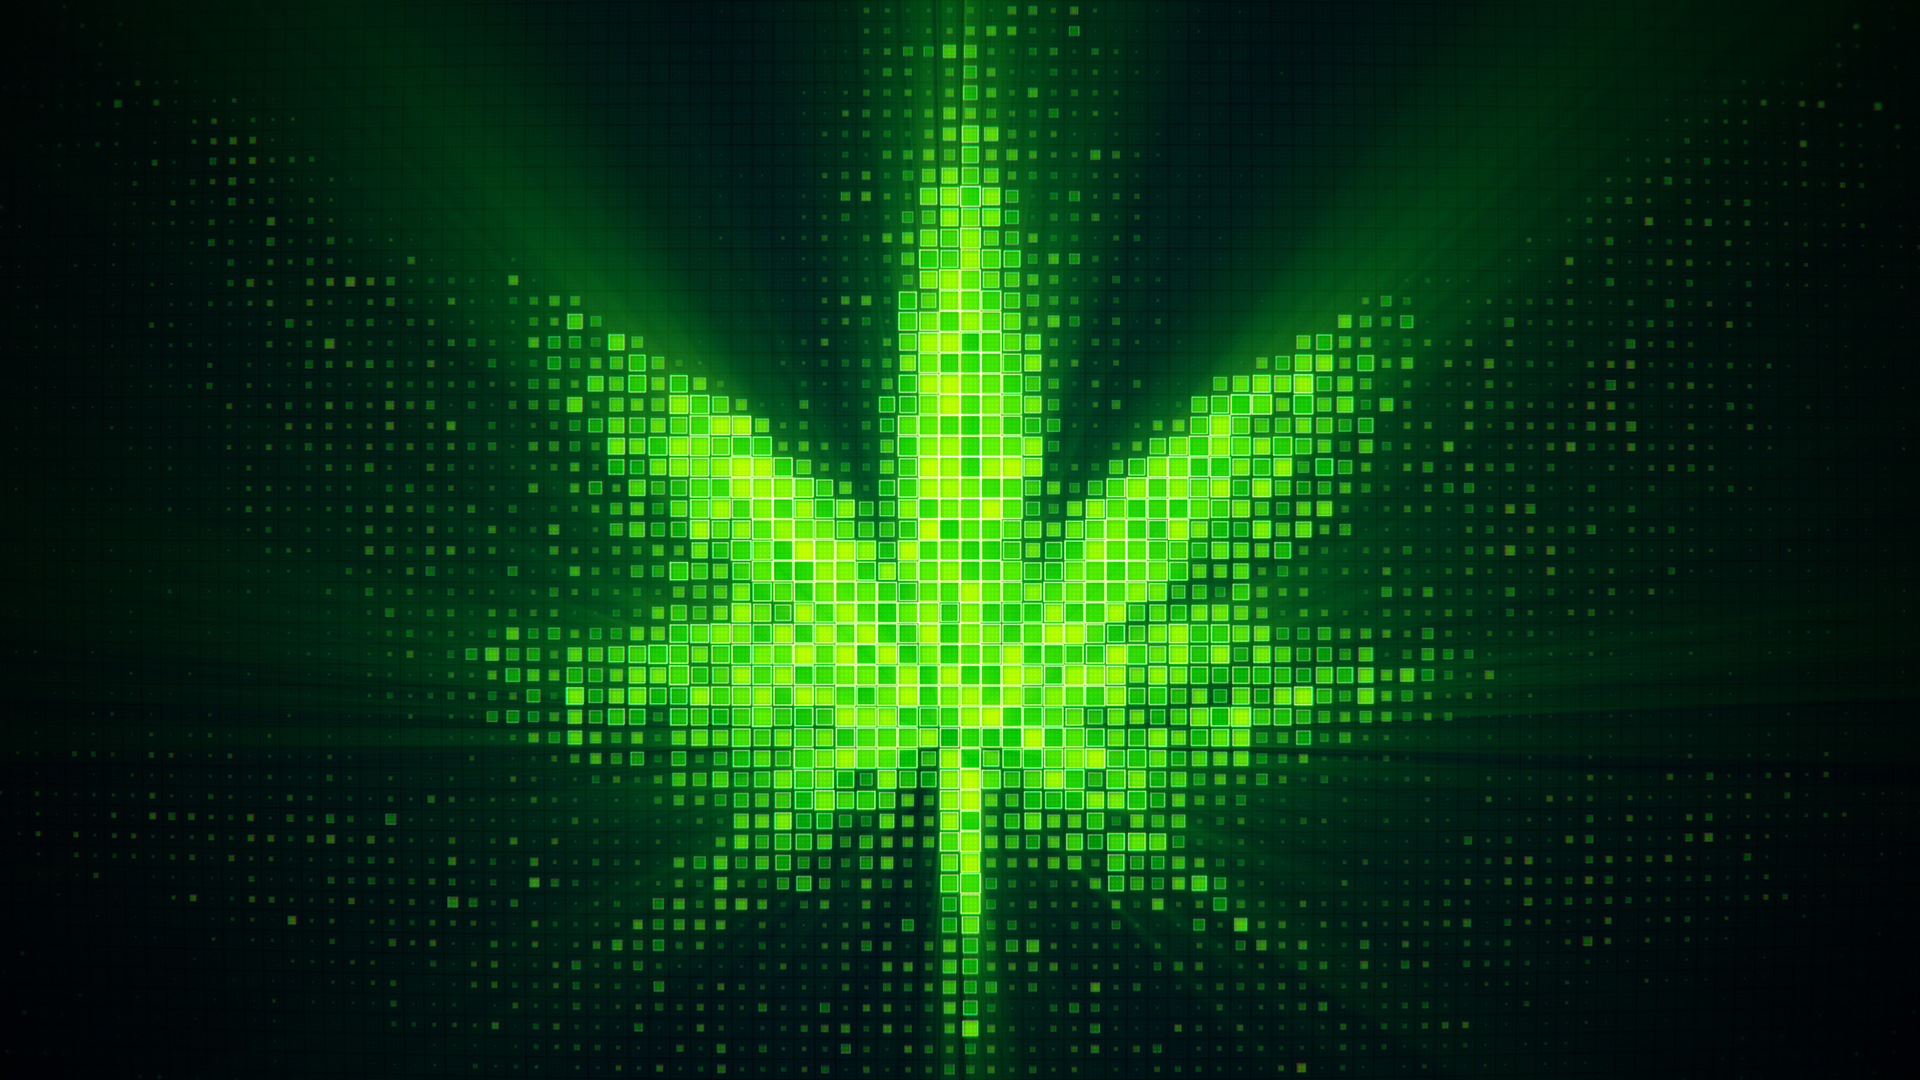 The unlikely alliance of medical cannabis and digital medical innovation